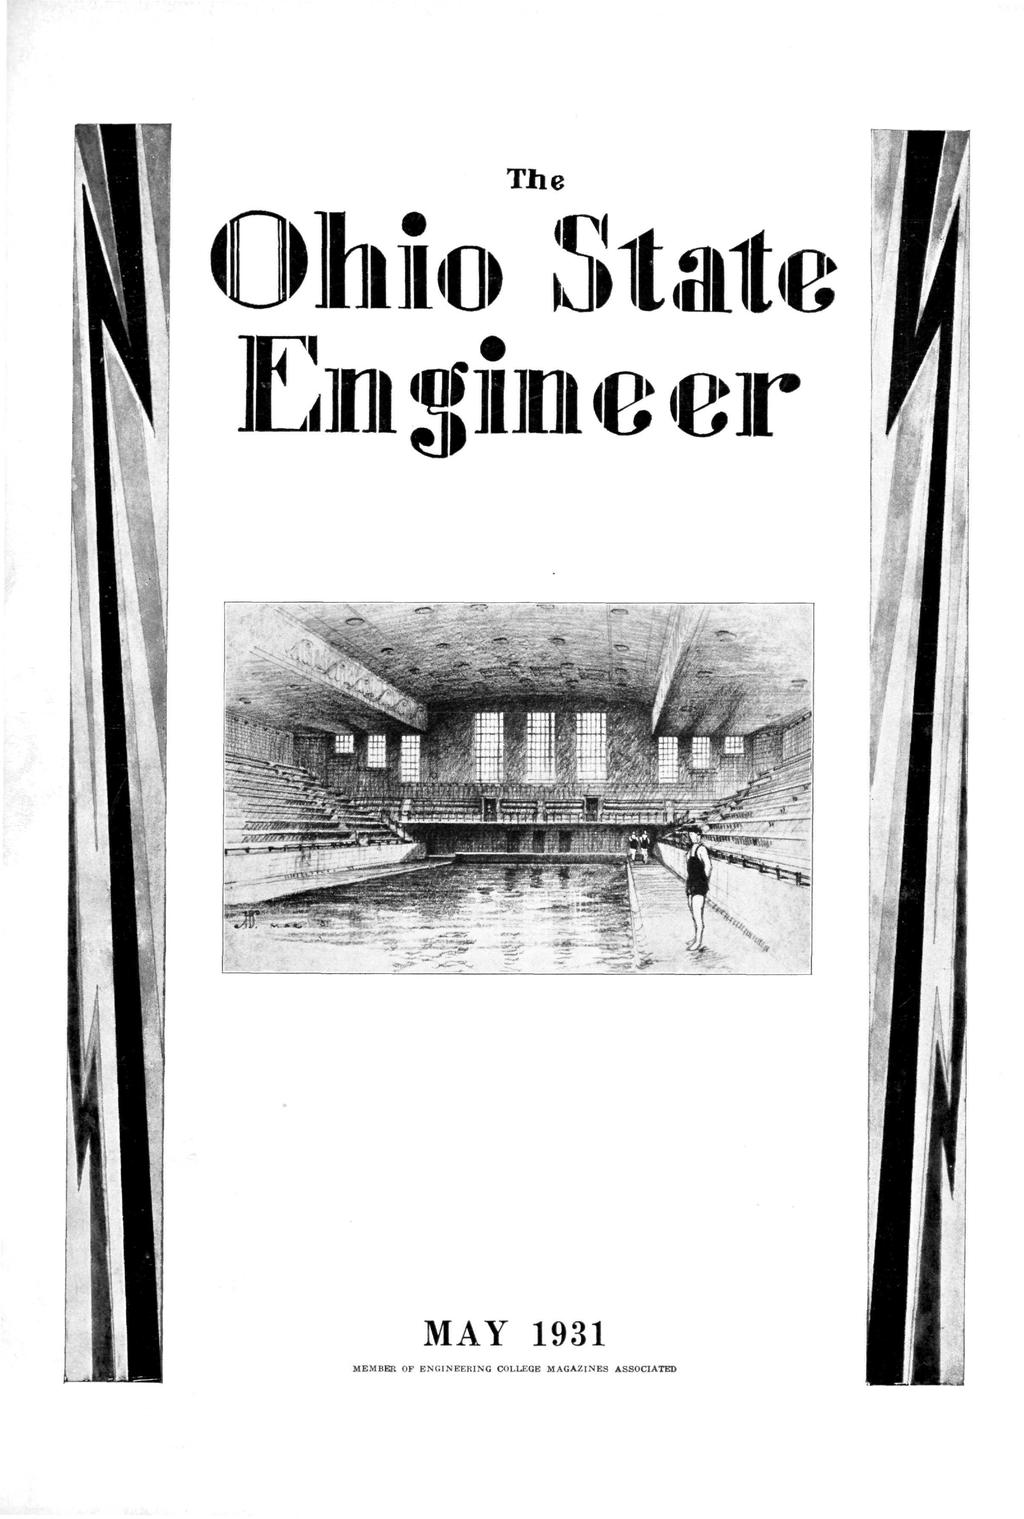 The Ohio State Engineer MAY 1931 MEMBER